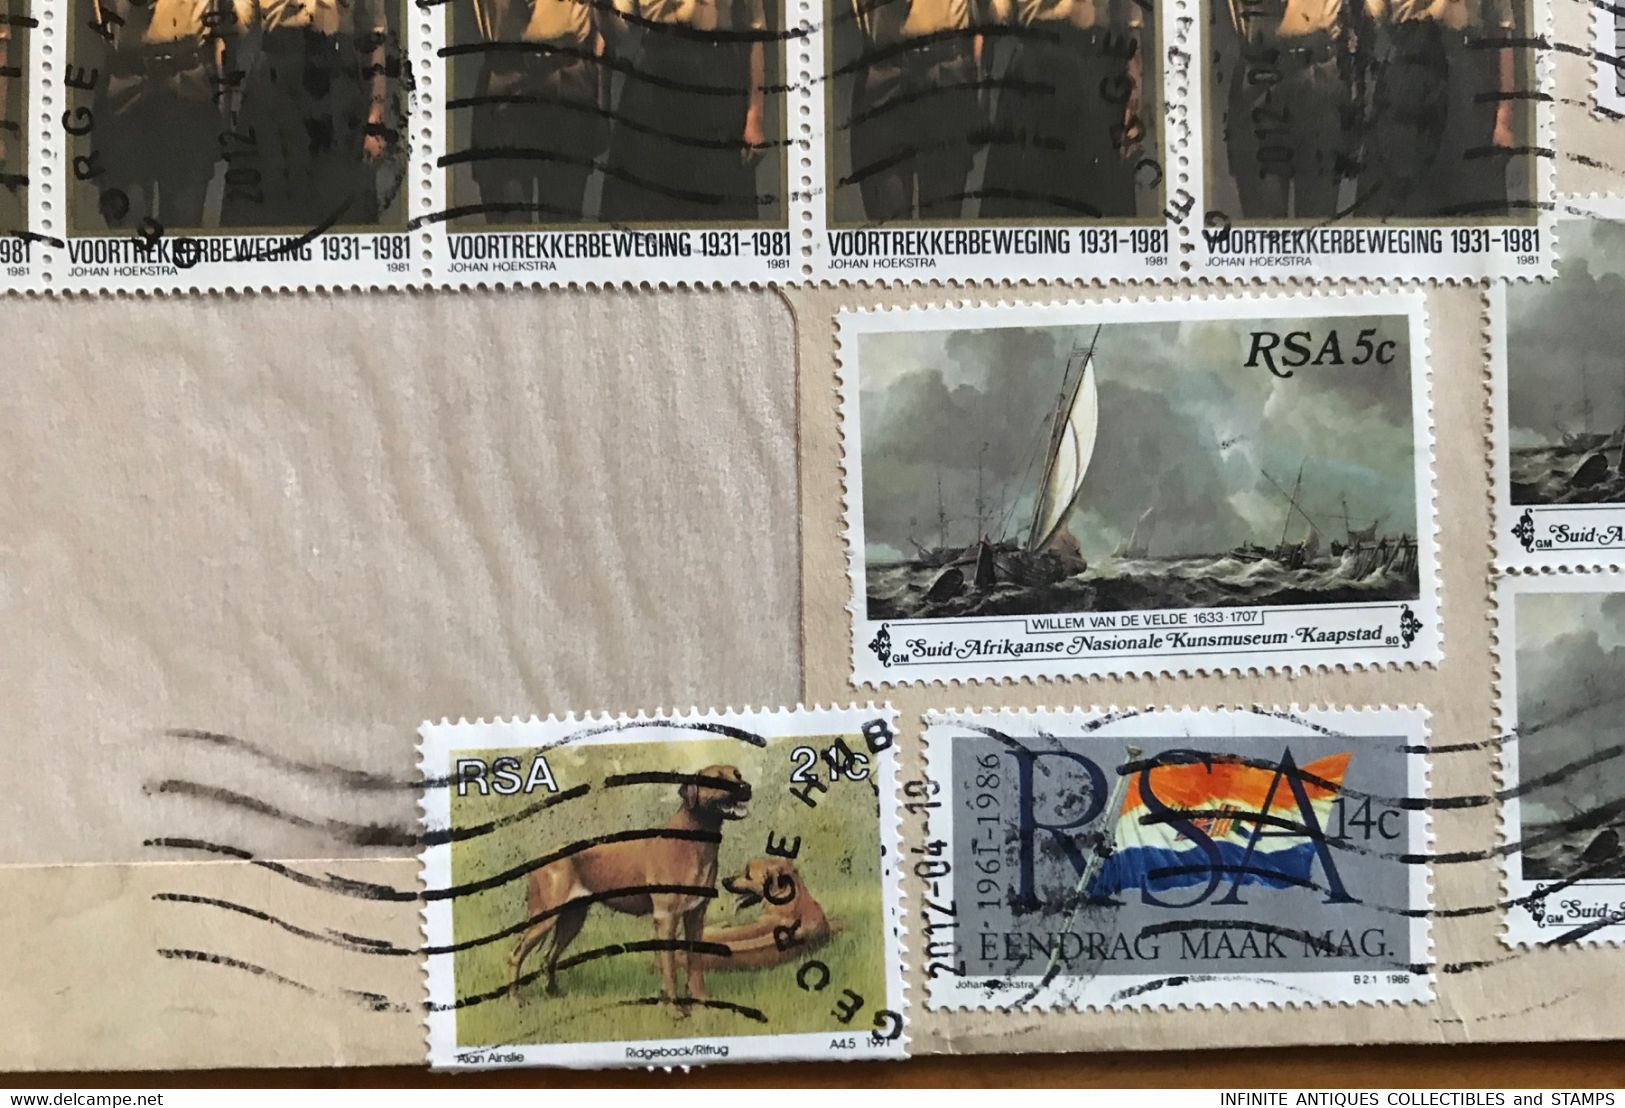 SOUTH AFRICA=LETTER=2012=GEORGE POSTMARK=CDS=CAPE PROVINCE=Mixed Stamps On Cover=BOYSCOUTS=DOG=FLAG=SAILING SHIP=BEADS - Briefe U. Dokumente